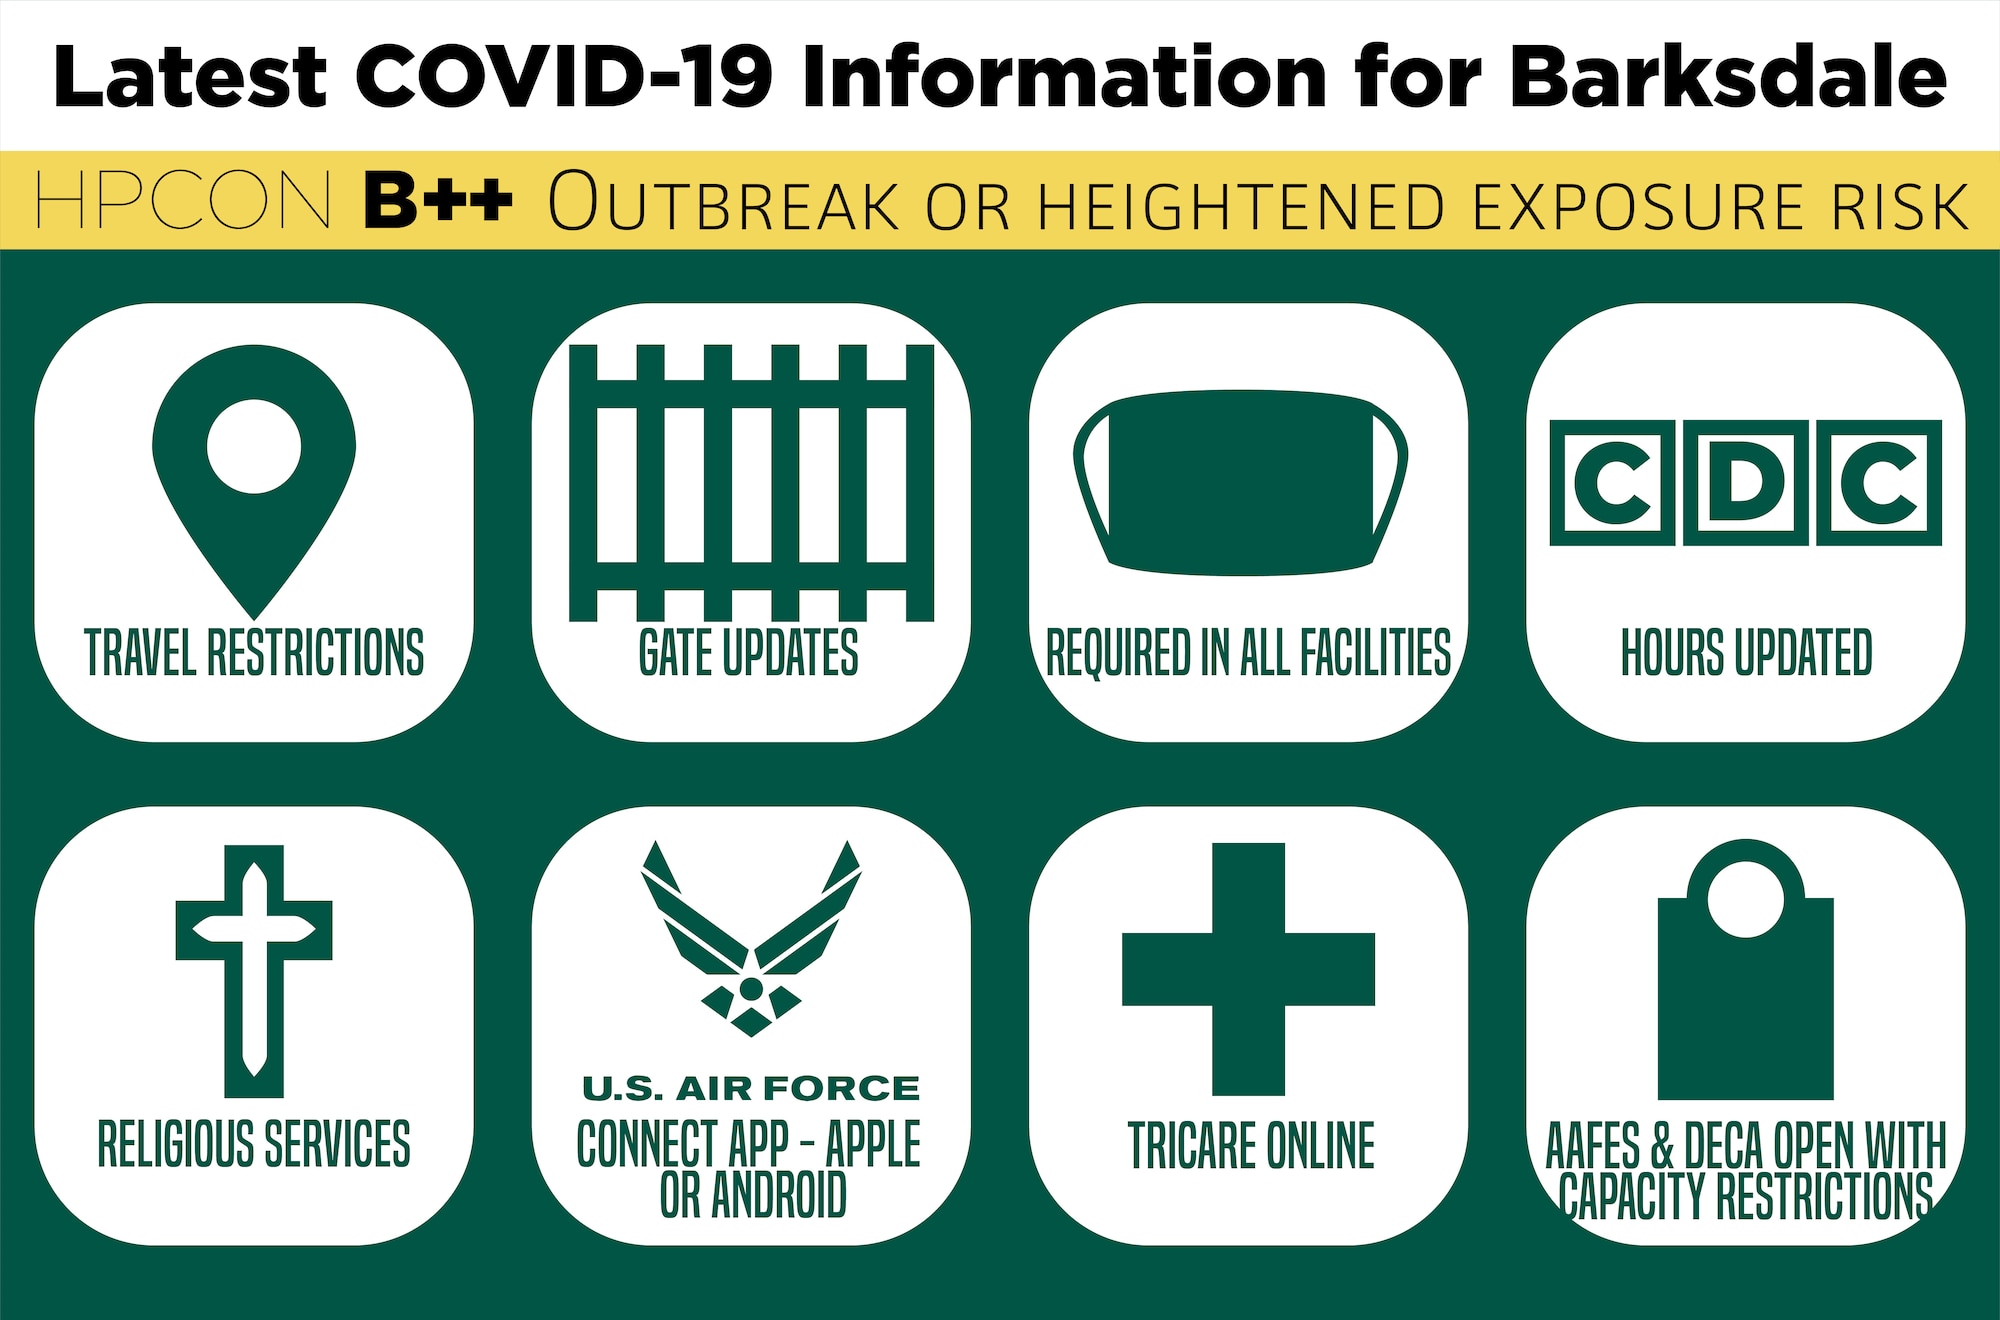 This graphic was created for use on the barksdale.af.mil COVID-19 front page.